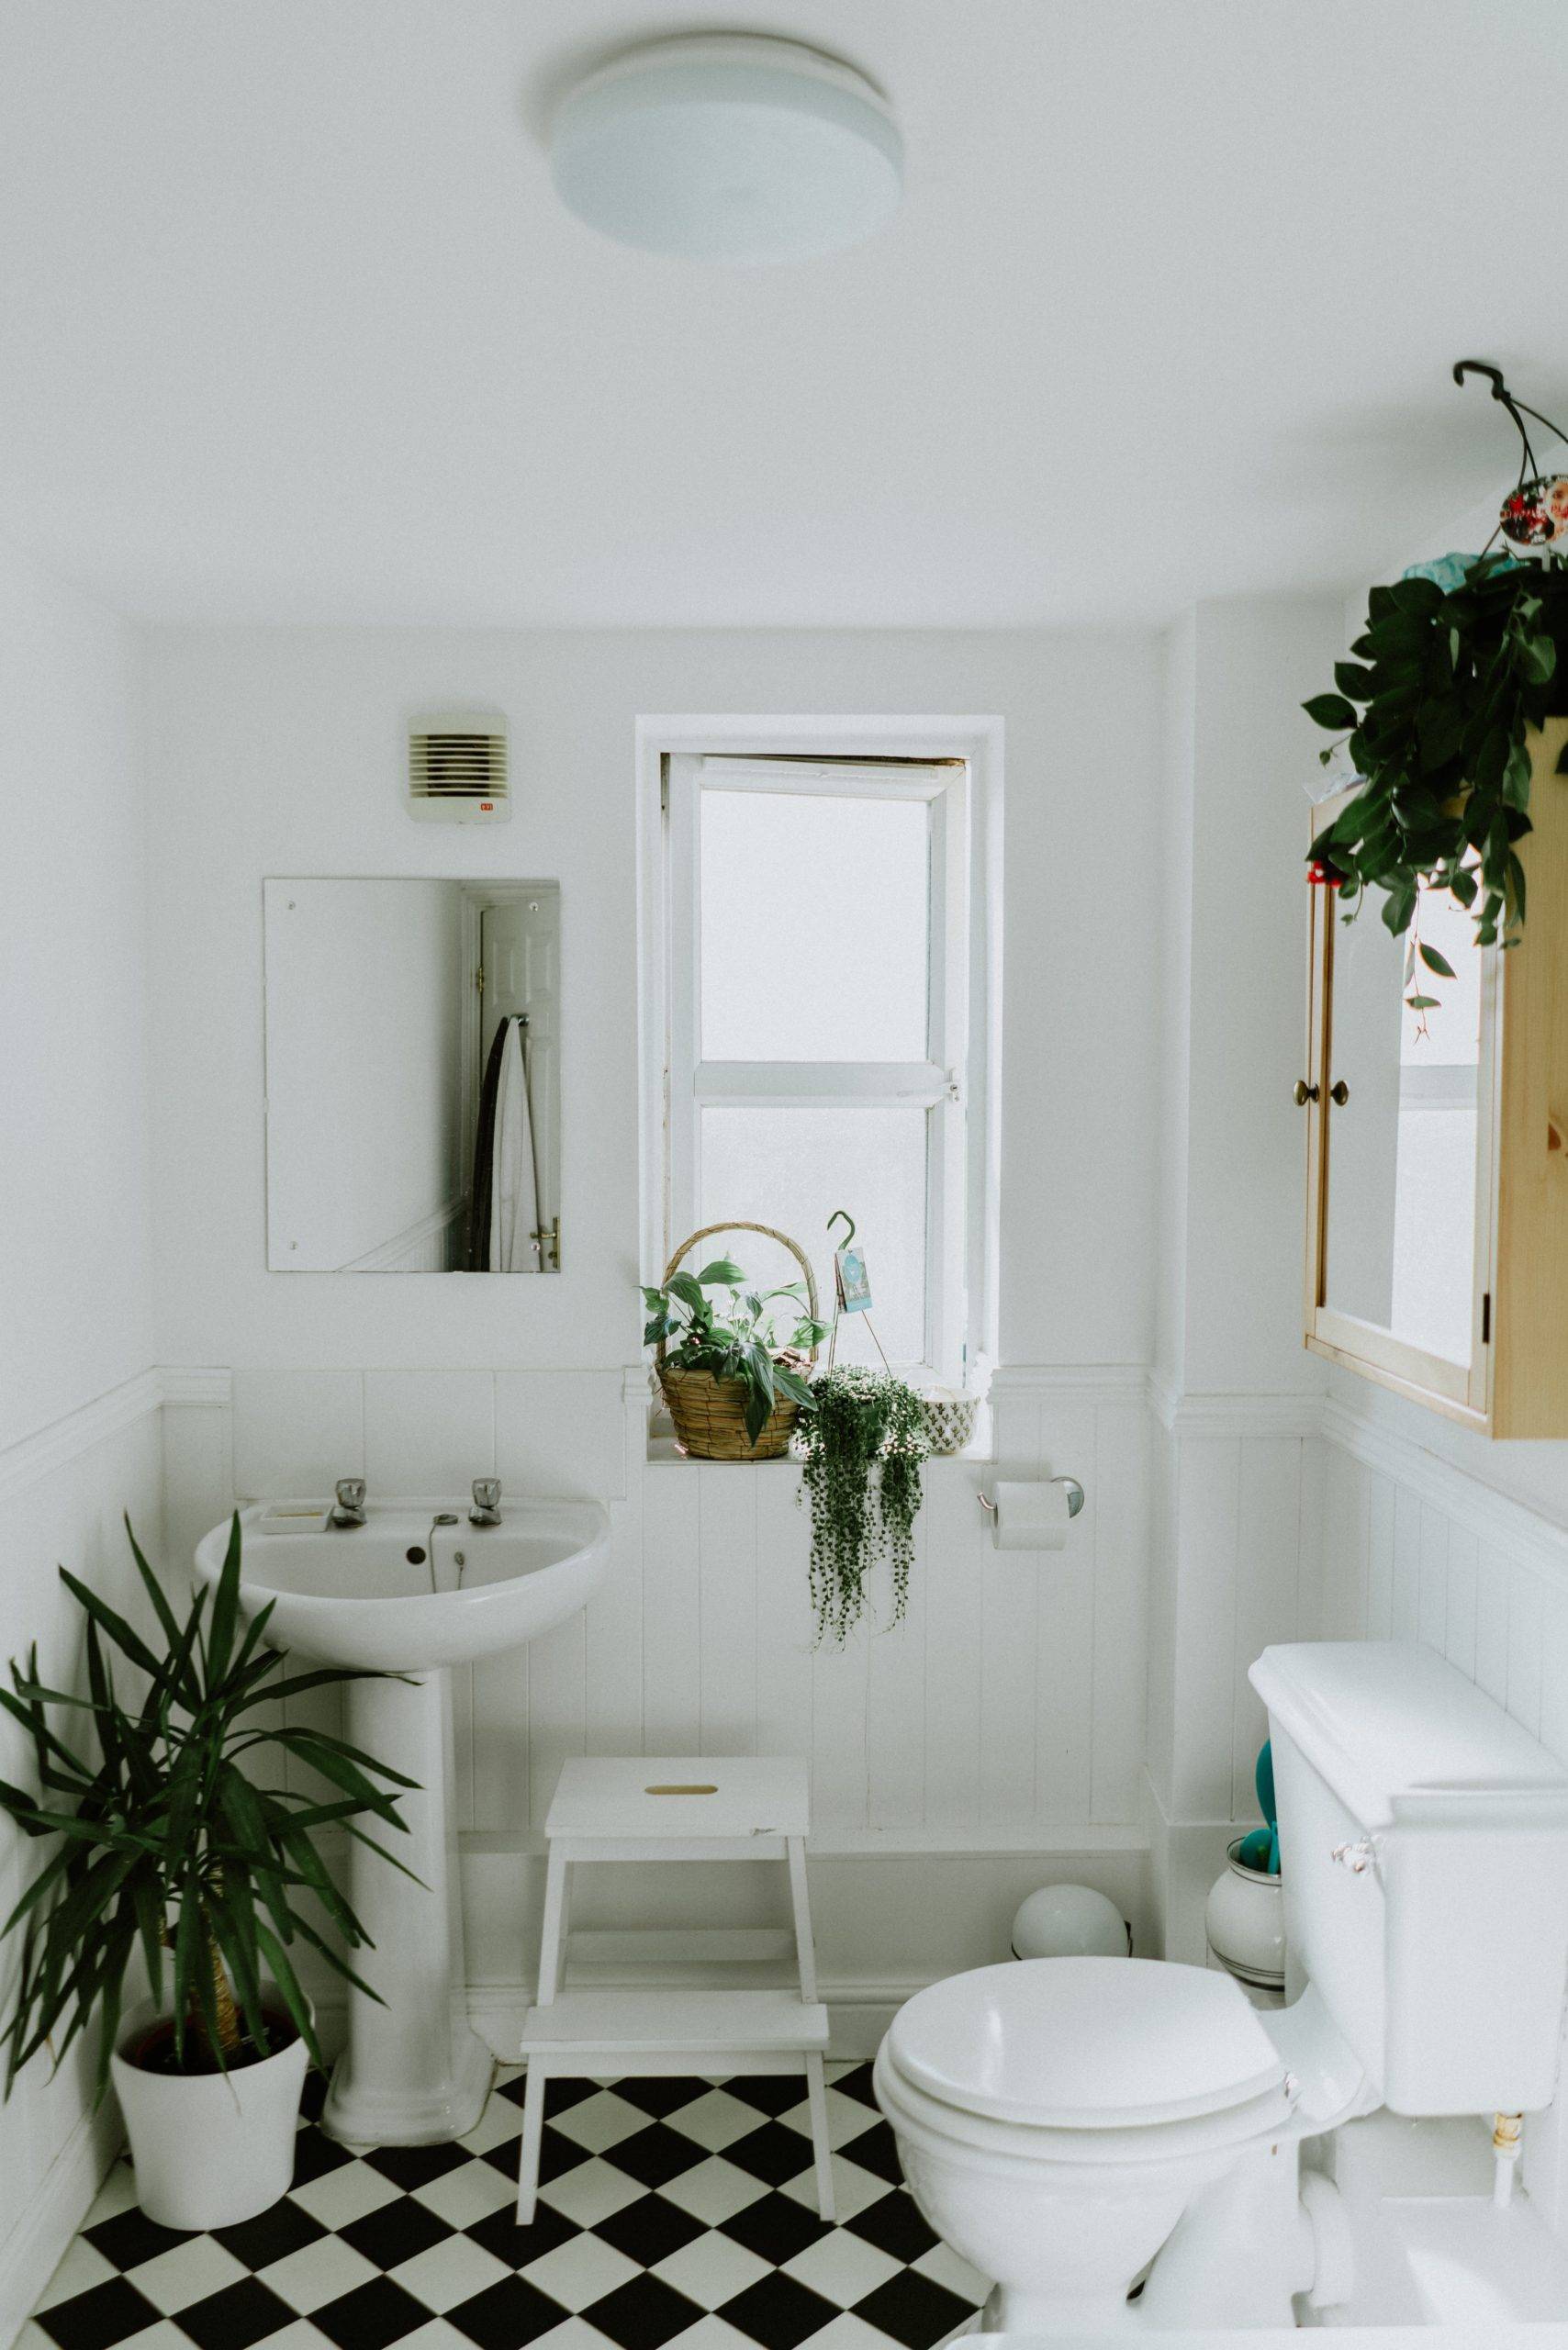 Black and white bathroom with green plants